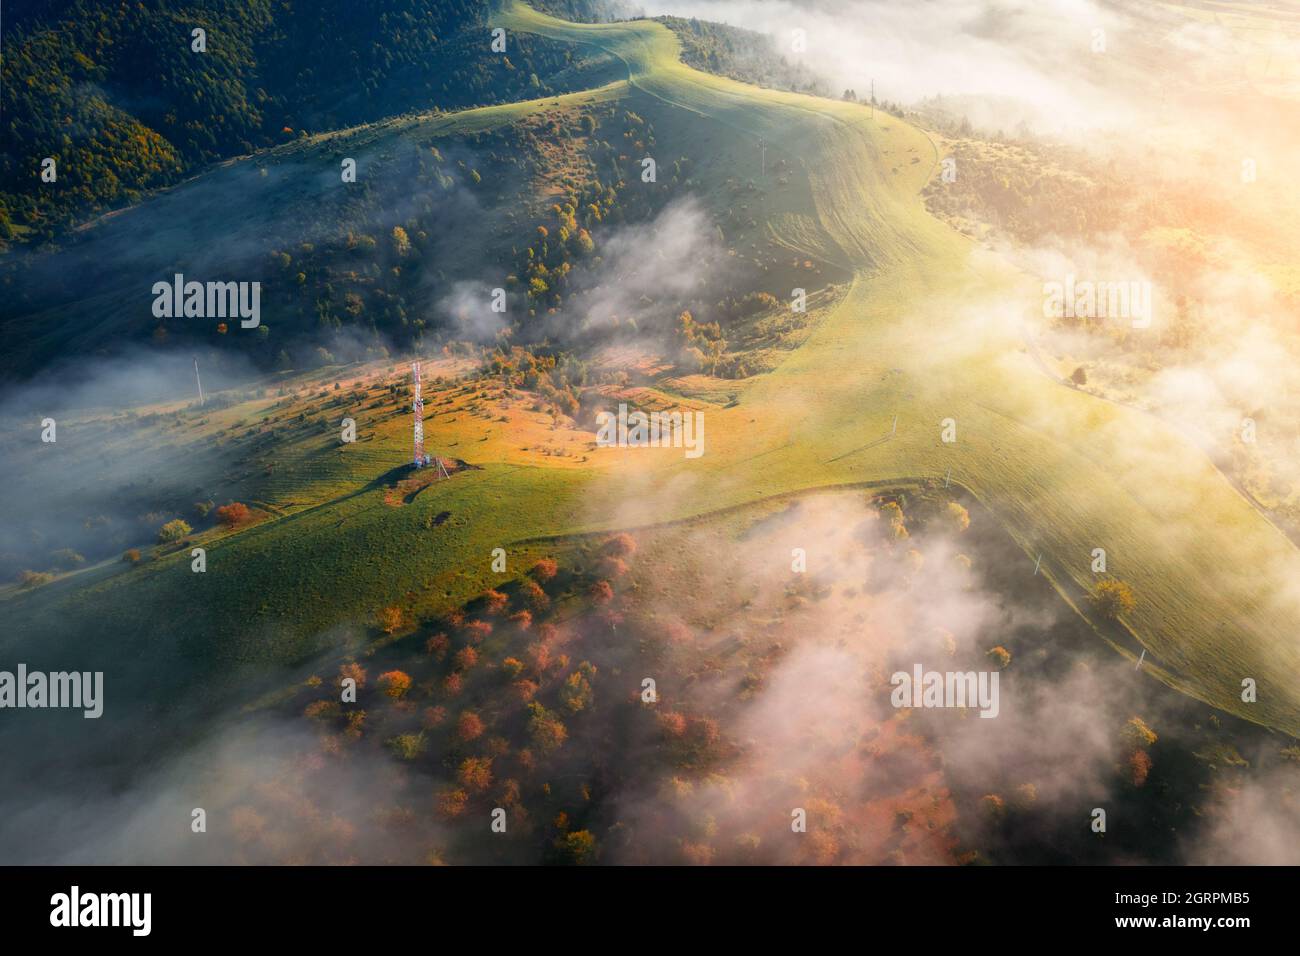 Amazing flowing morning fog spreads over green meadows in autumn mountains. Ukrainian Carpathian mountains. Landscape photography Stock Photo